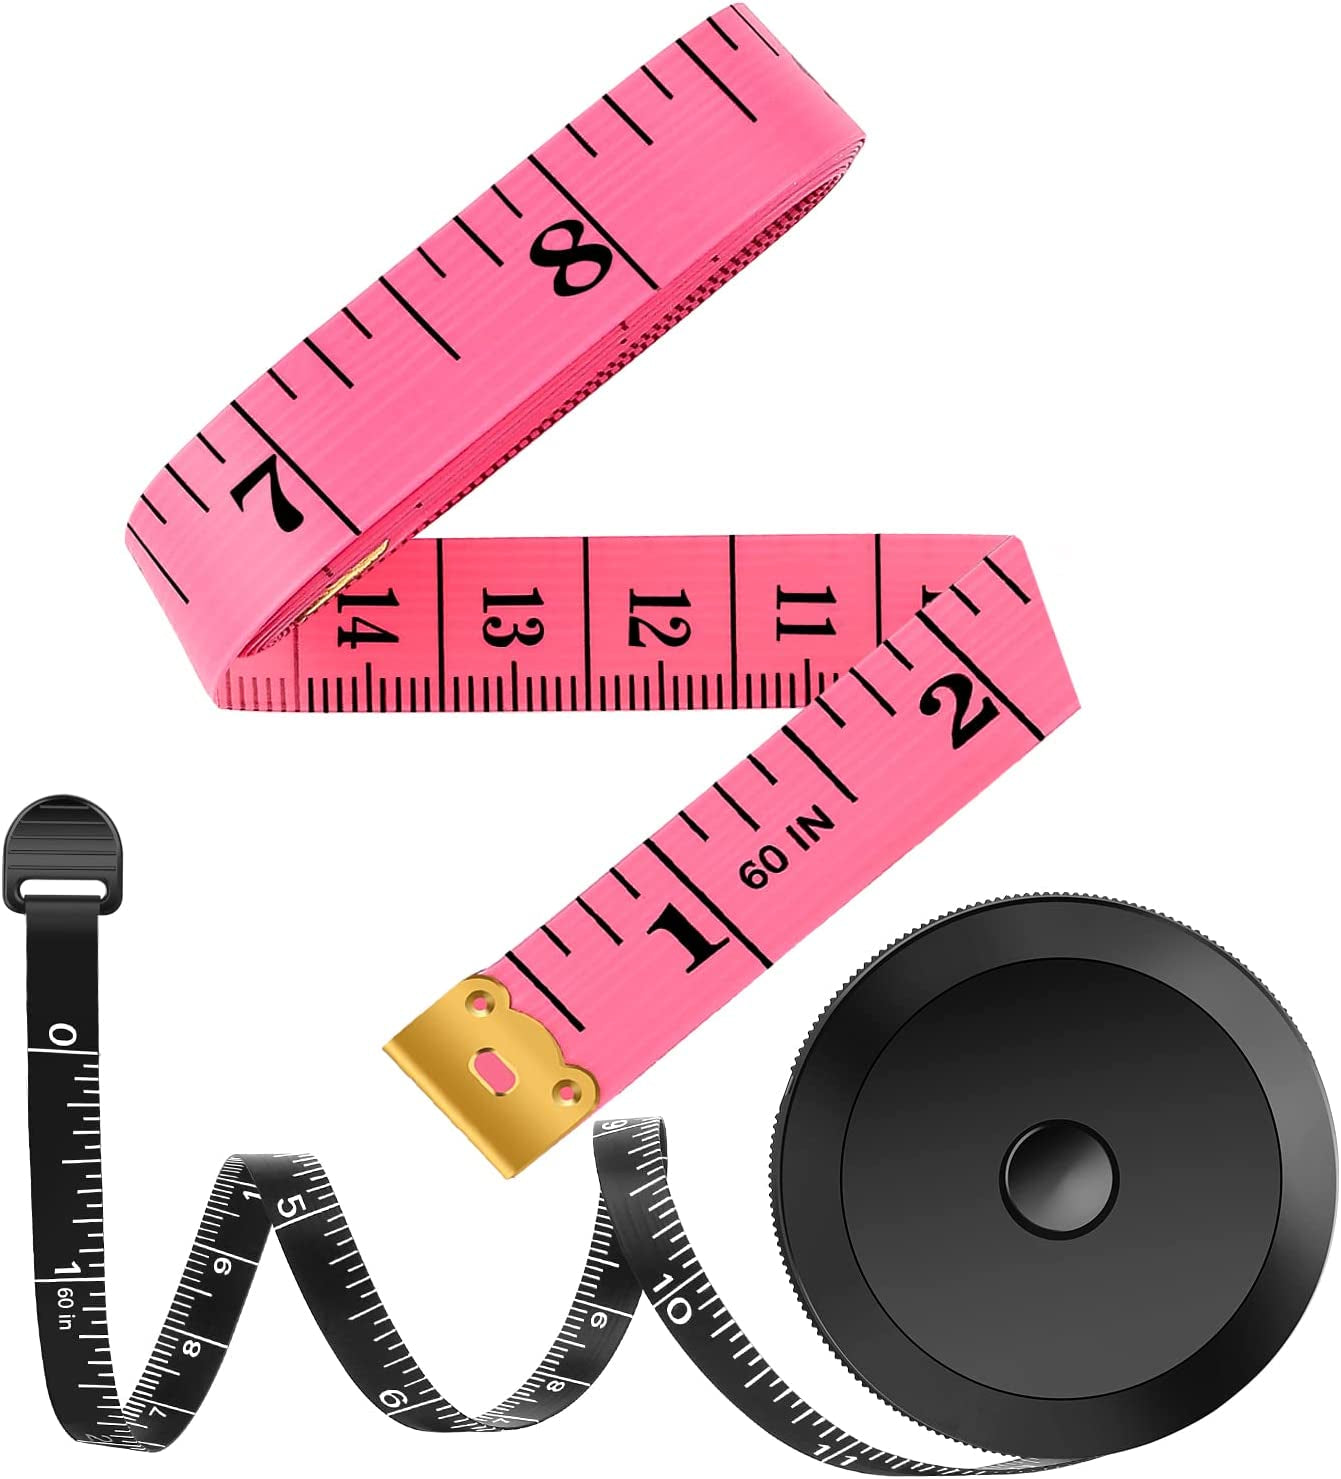 2 Pack Tape Measure Measuring Tape for Body Fabric Sewing Tailor Cloth Knitting Vinyl Home Craft Measurements, 60-Inch Soft Fashion Pink & Retractable Black Double Scales Rulers for Body Weight Loss